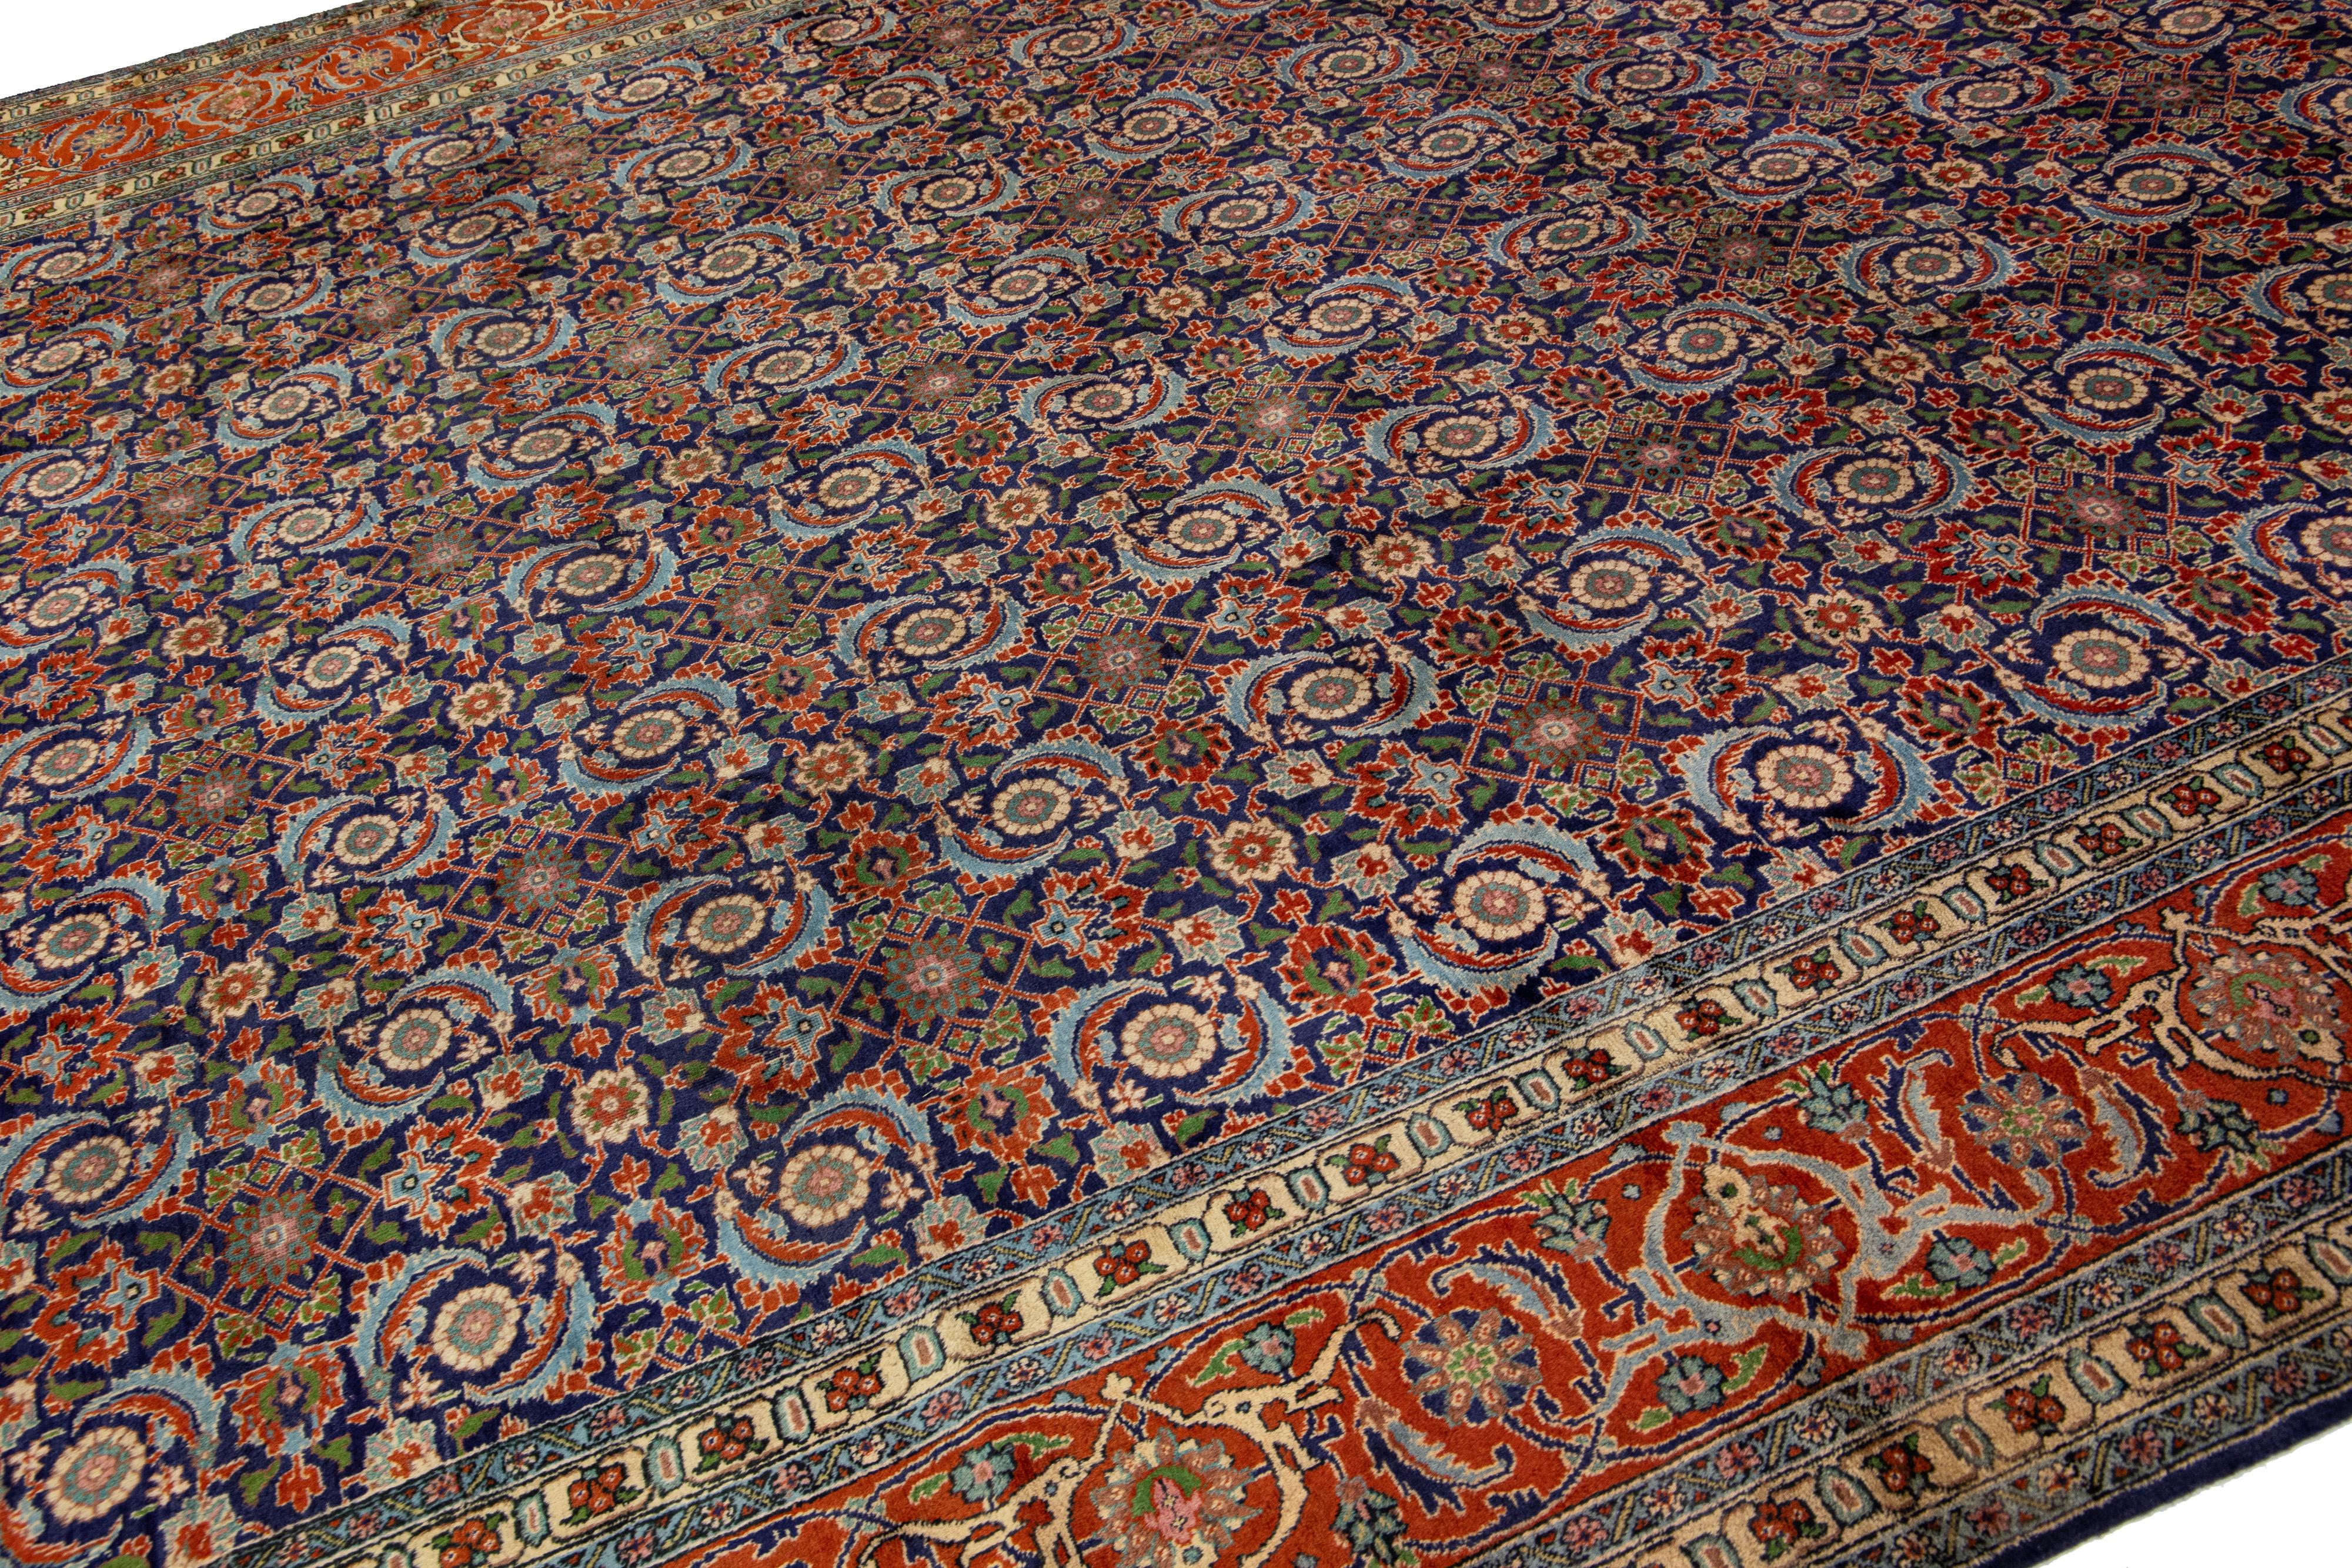 Blue and Orange Antique Wool Rug Persian Tabriz From 1920s with allover Design In Good Condition For Sale In Norwalk, CT